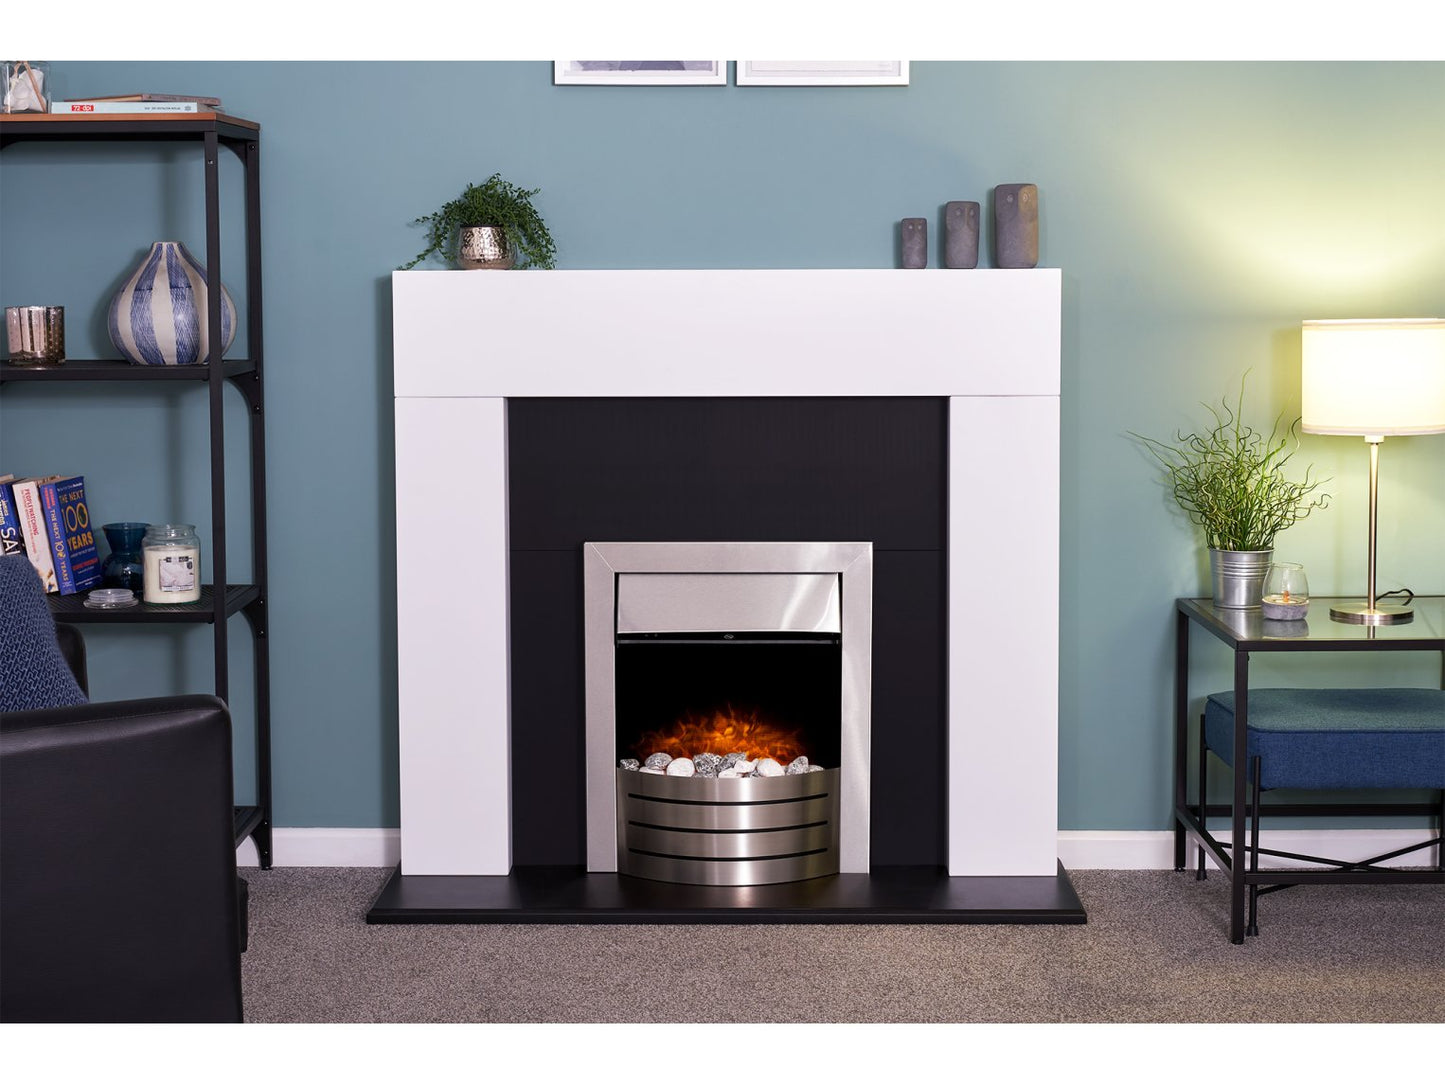 Adam Miami Fireplace Pure White & Black + Comet Electric Fire Brushed Steel, 48"